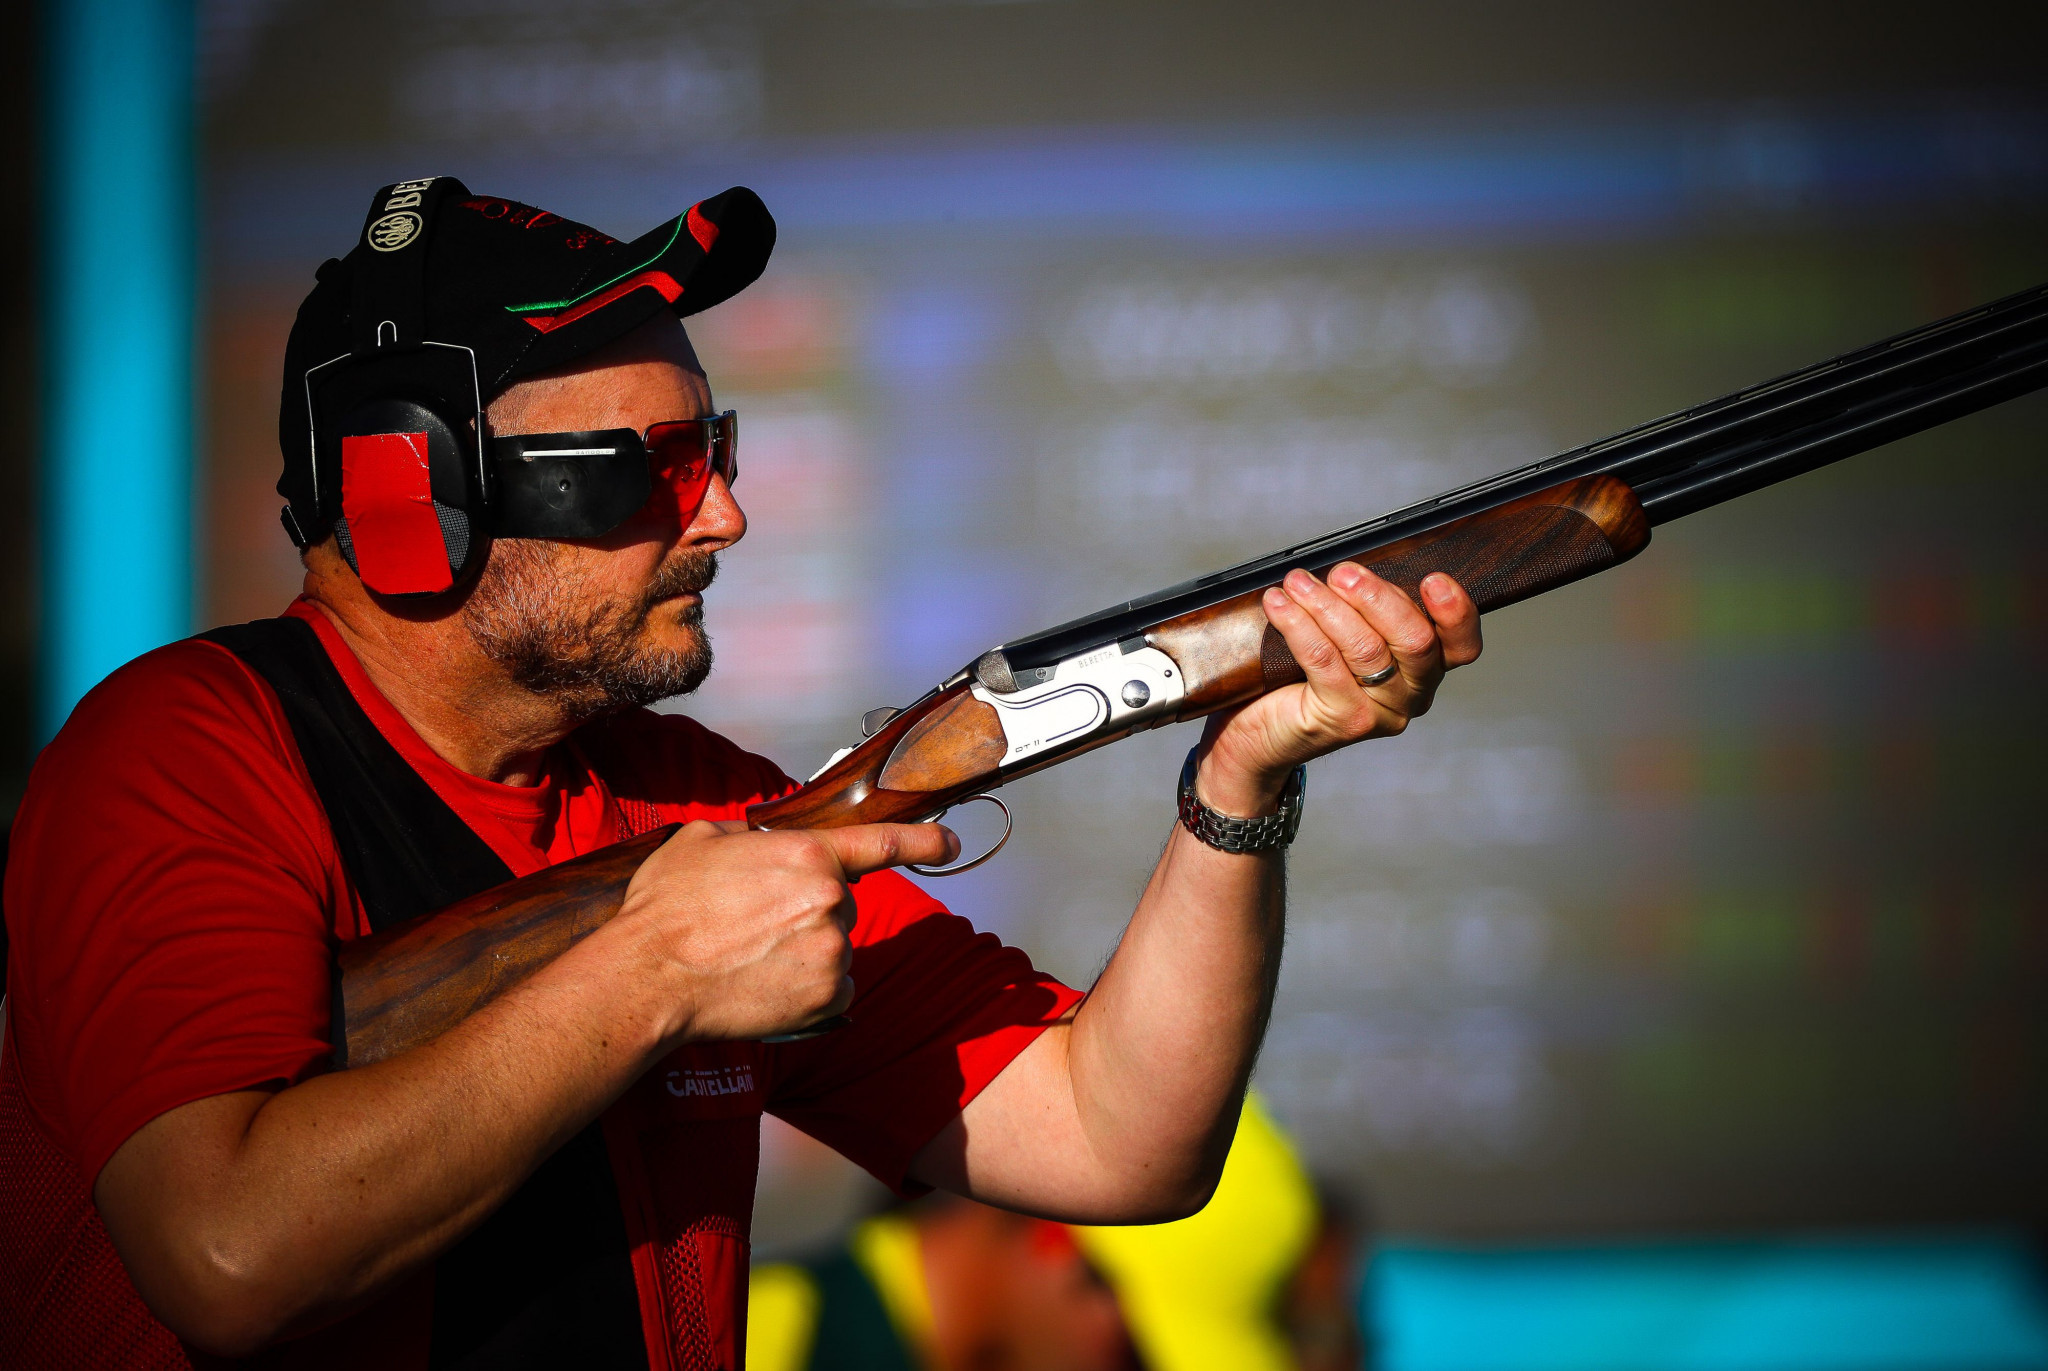 Birmingham 2022 shooting medal events could take place in India ©Getty Images